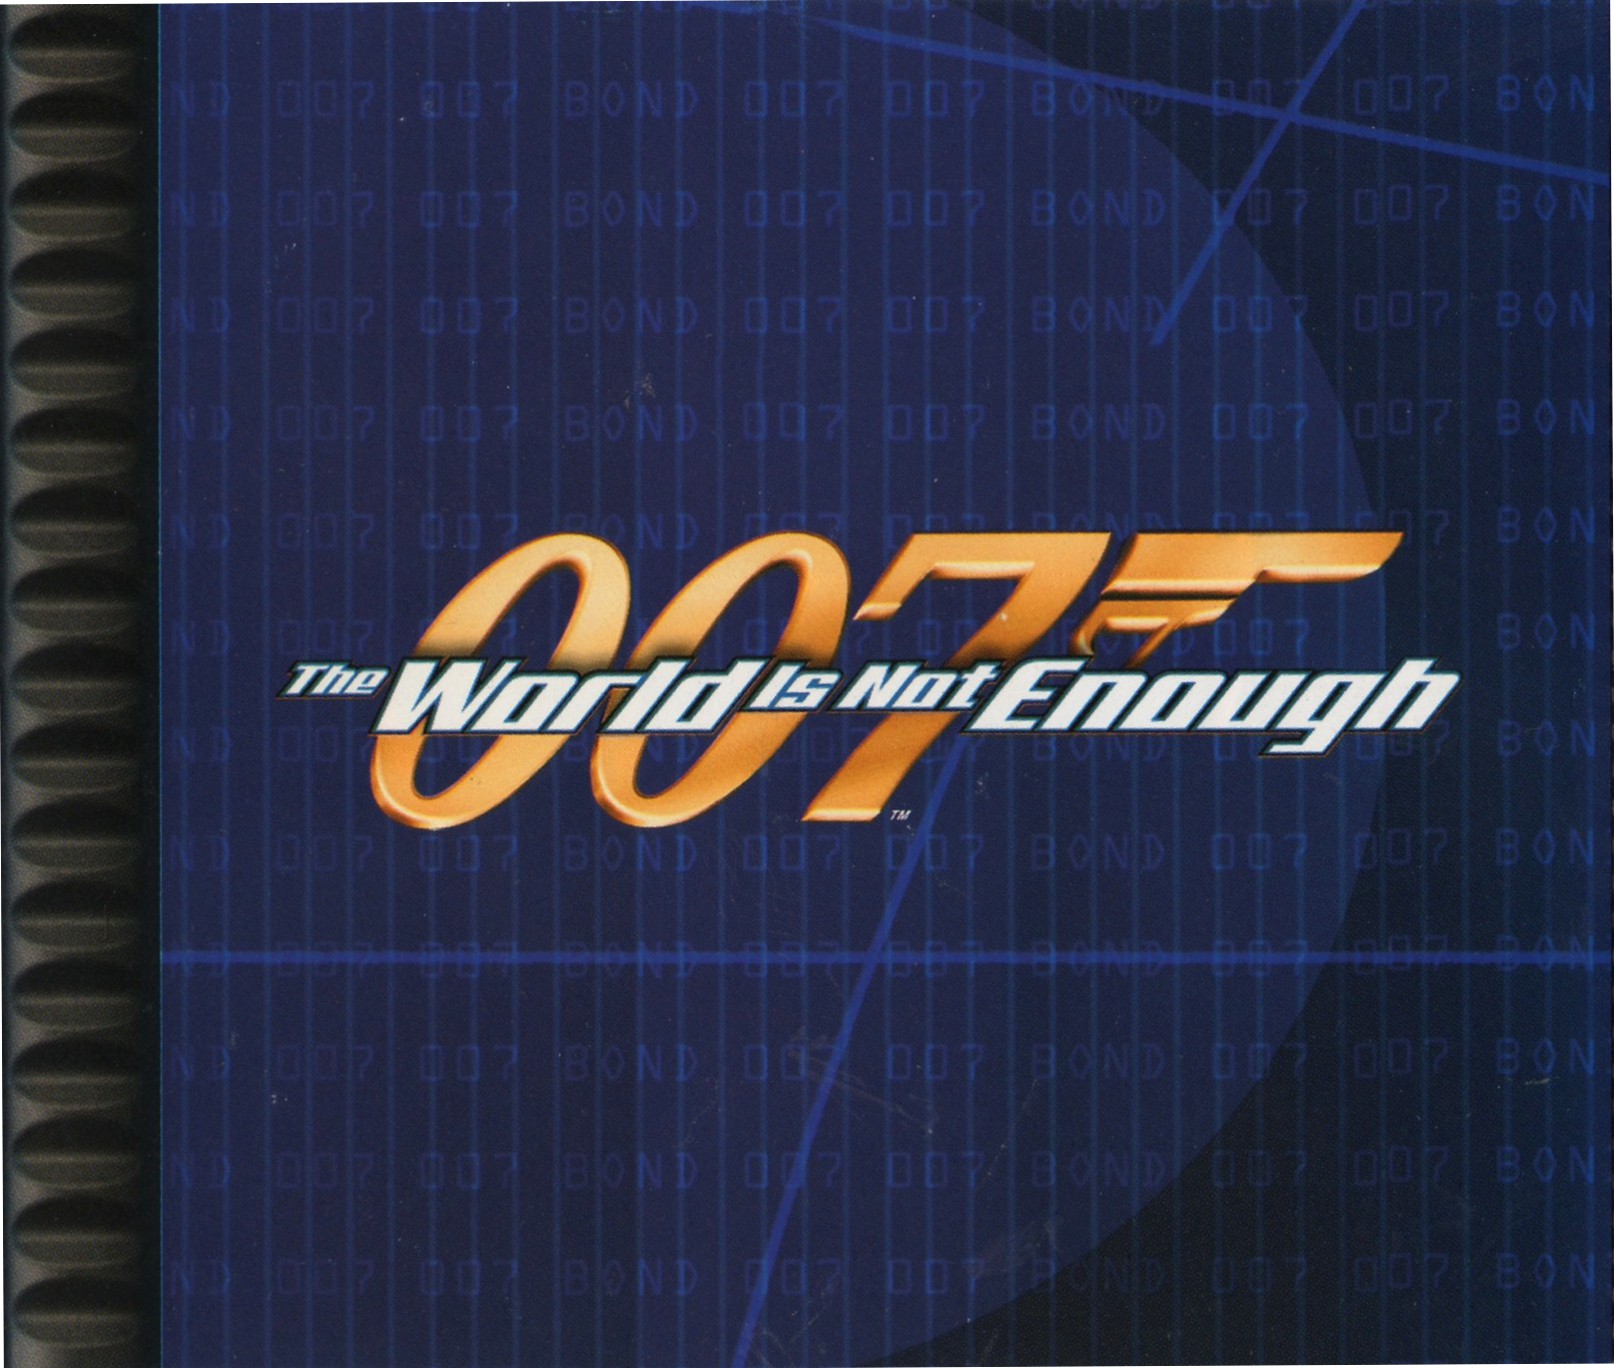 007 - The World is not enough PSX cover